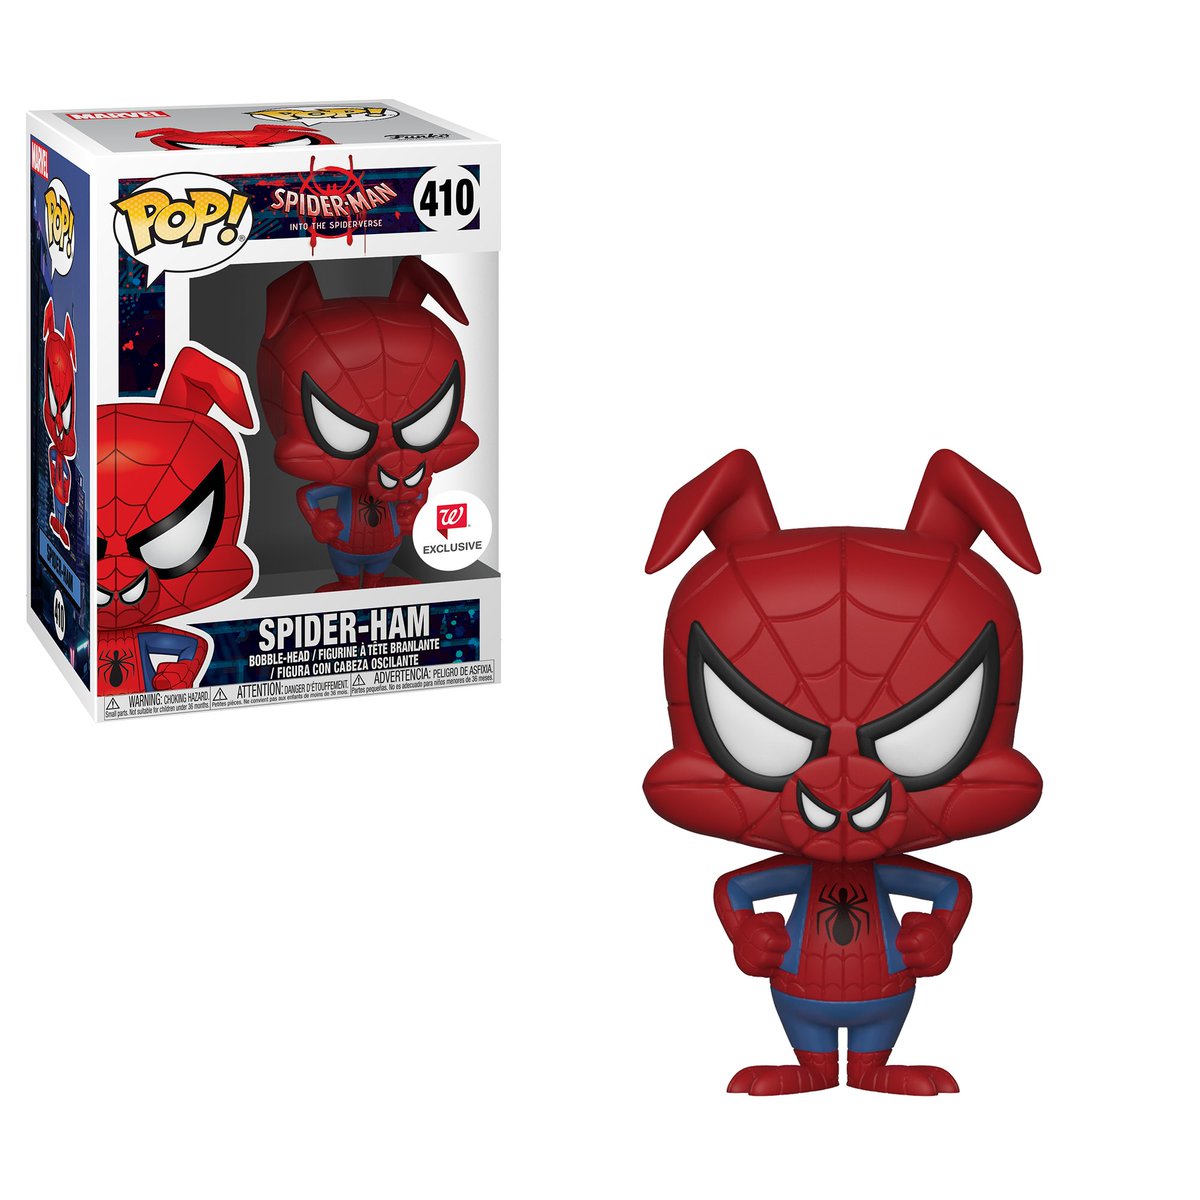 RT & follow @OriginalFunko for the chance to win a @Walgreens exclusive Spider-Ham Pop!